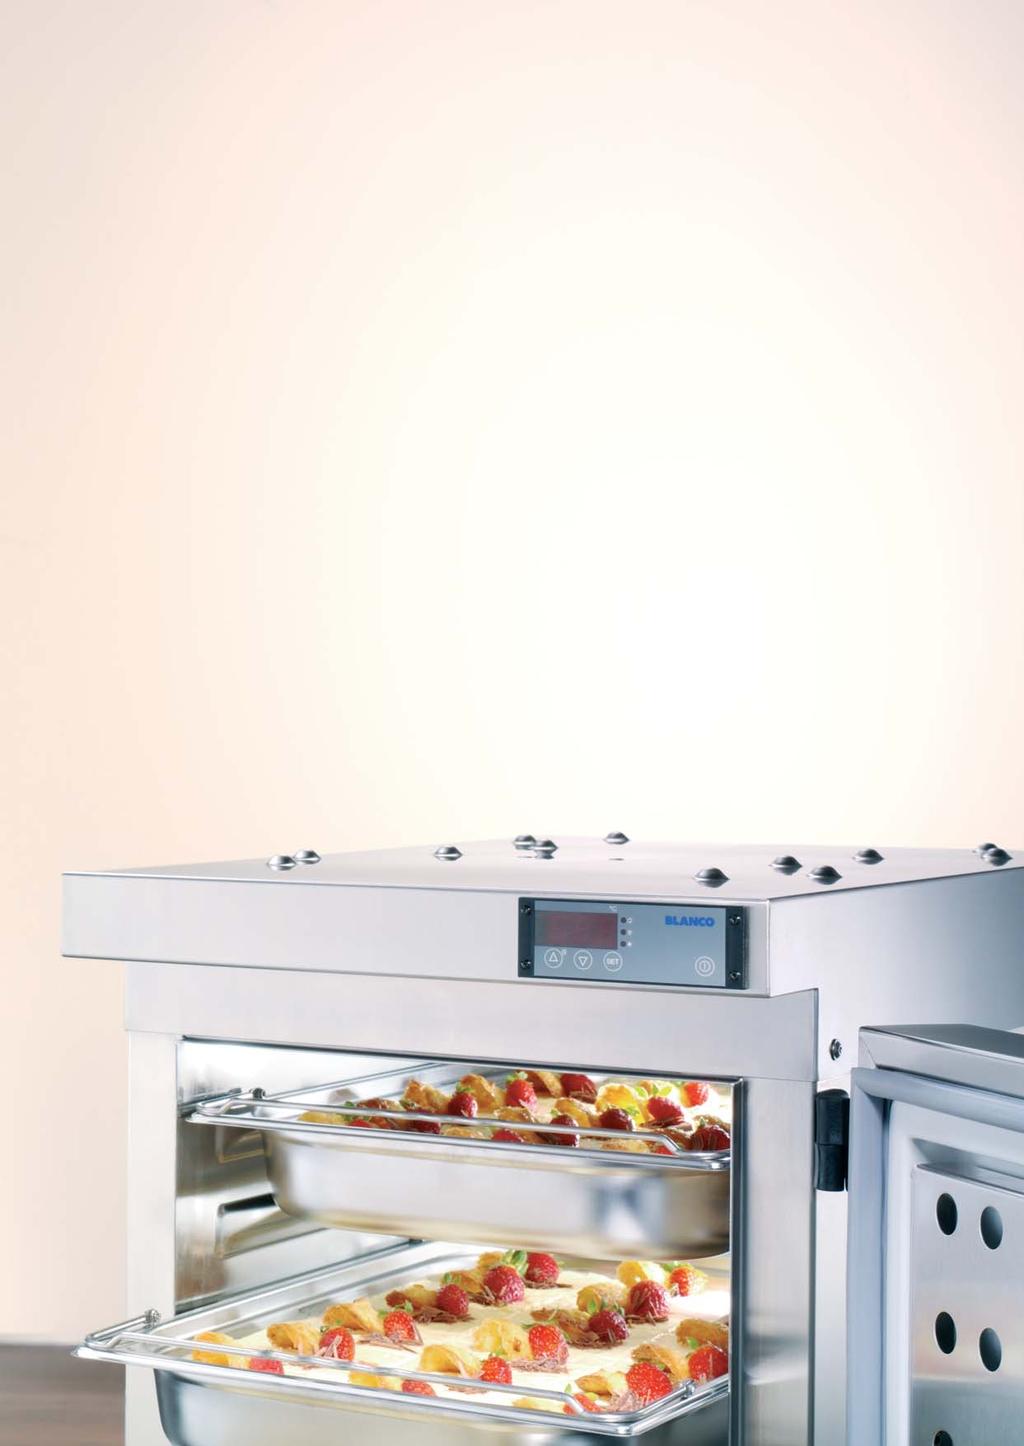 A fresh arrival: BLANCOTHERM EUK of stainless steel with active convection cooling. New members have been added to the BLANCOTHERM system family.